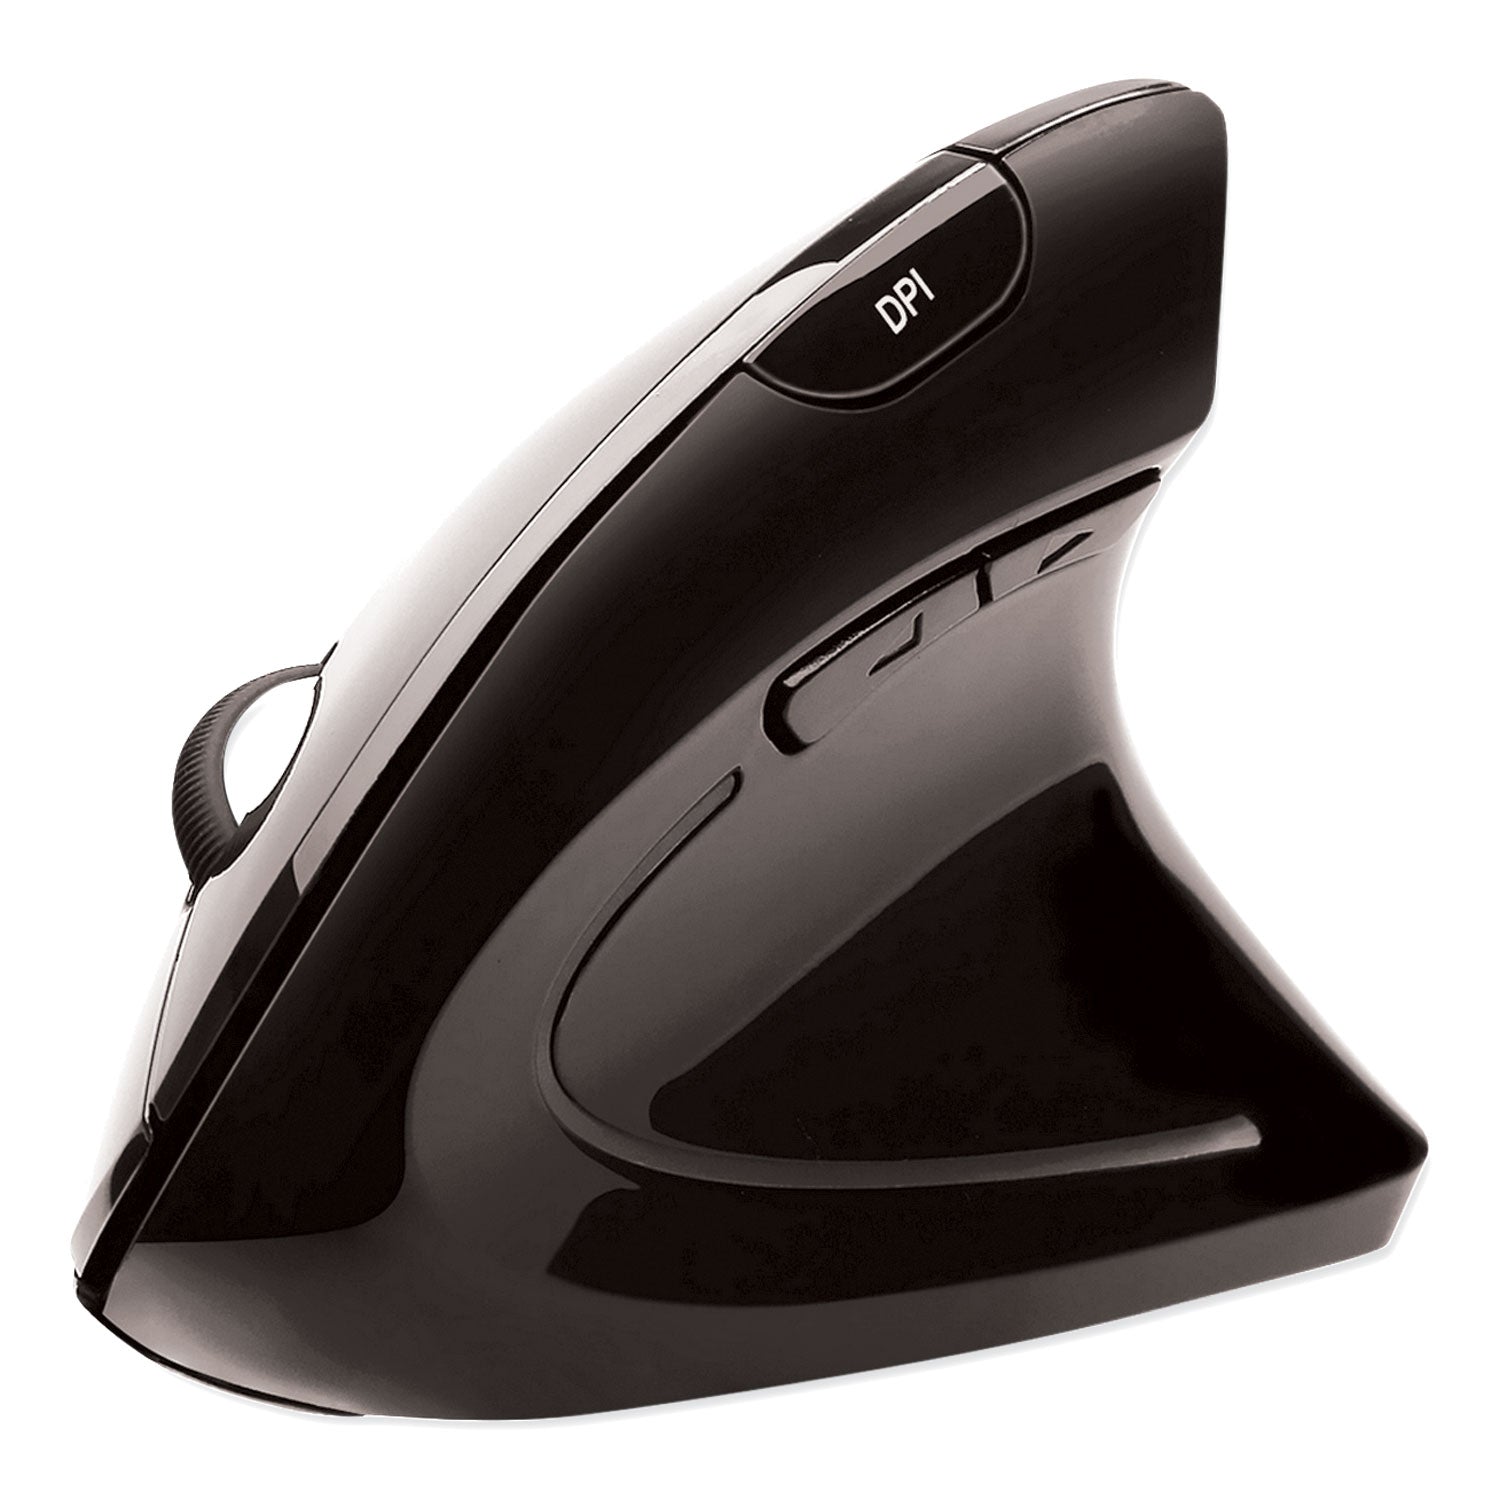 imouse-e10-wireless-vertical-ergonomic-usb-mouse-24-ghz-frequency-33-ft-wireless-range-right-hand-use-black_adeimousee10 - 1